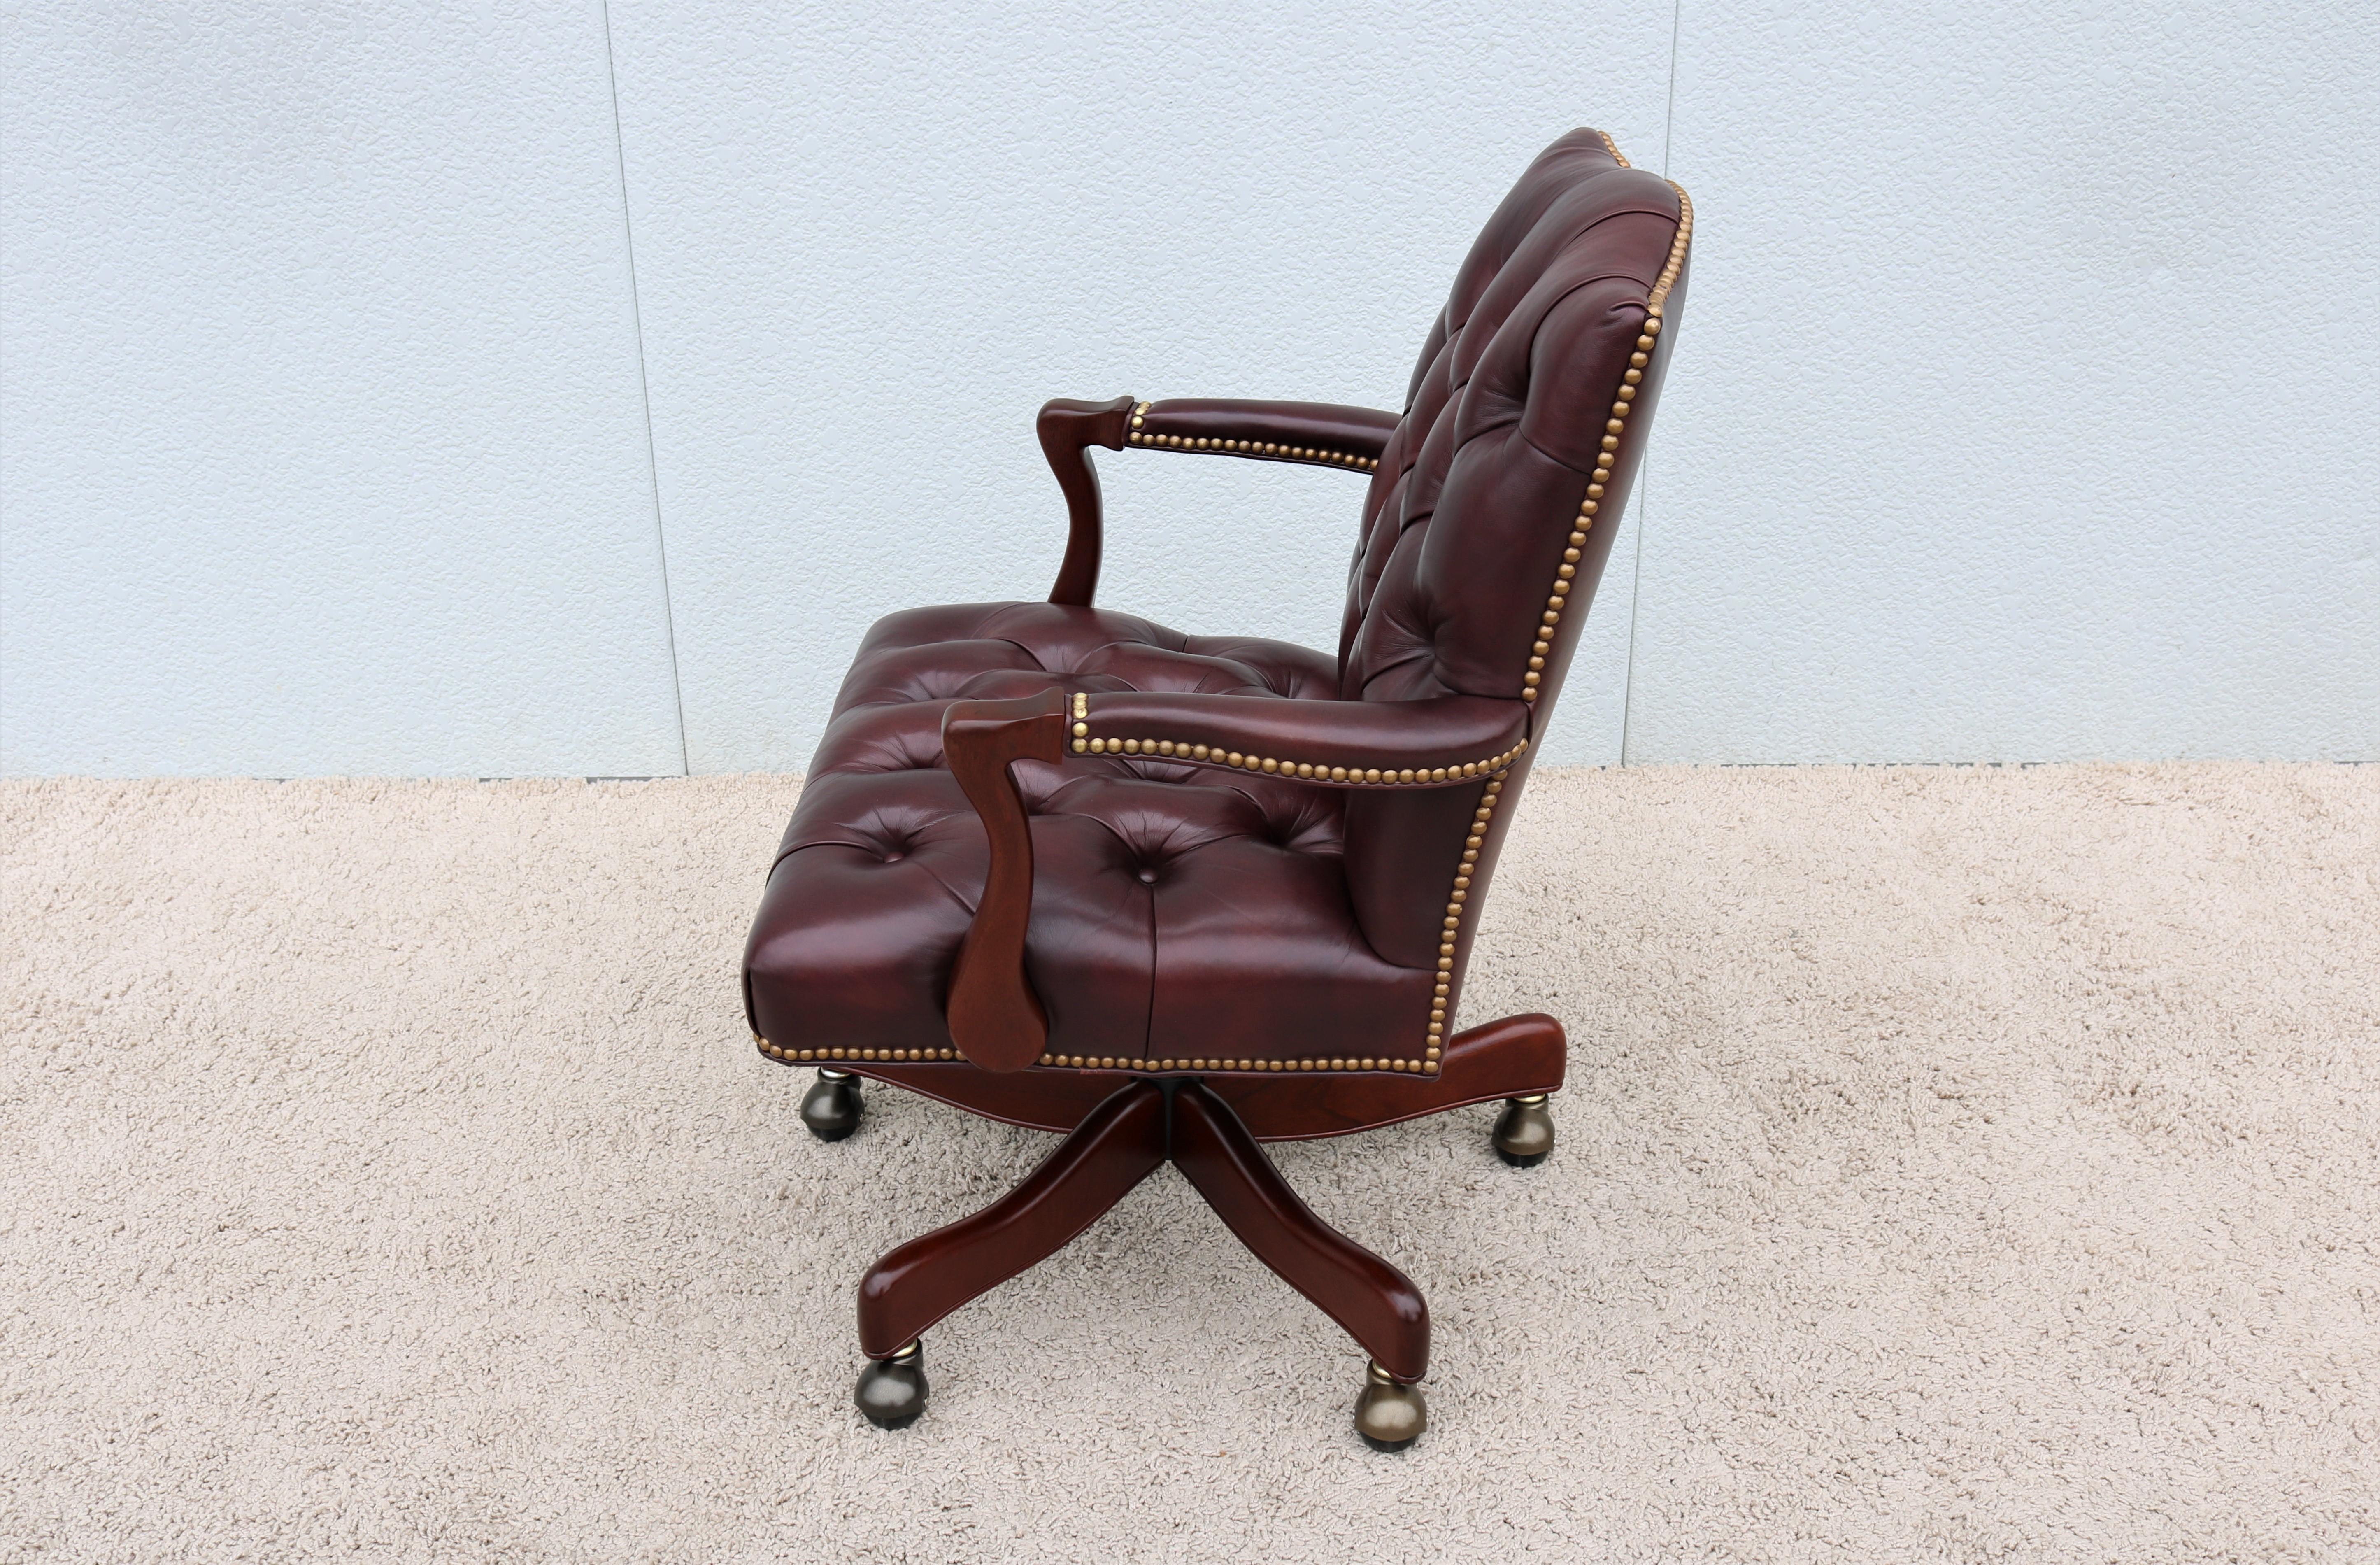 American Classic Cabot Wrenn Graham Tufted Burgundy Leather Executive Swivel Desk Chair For Sale